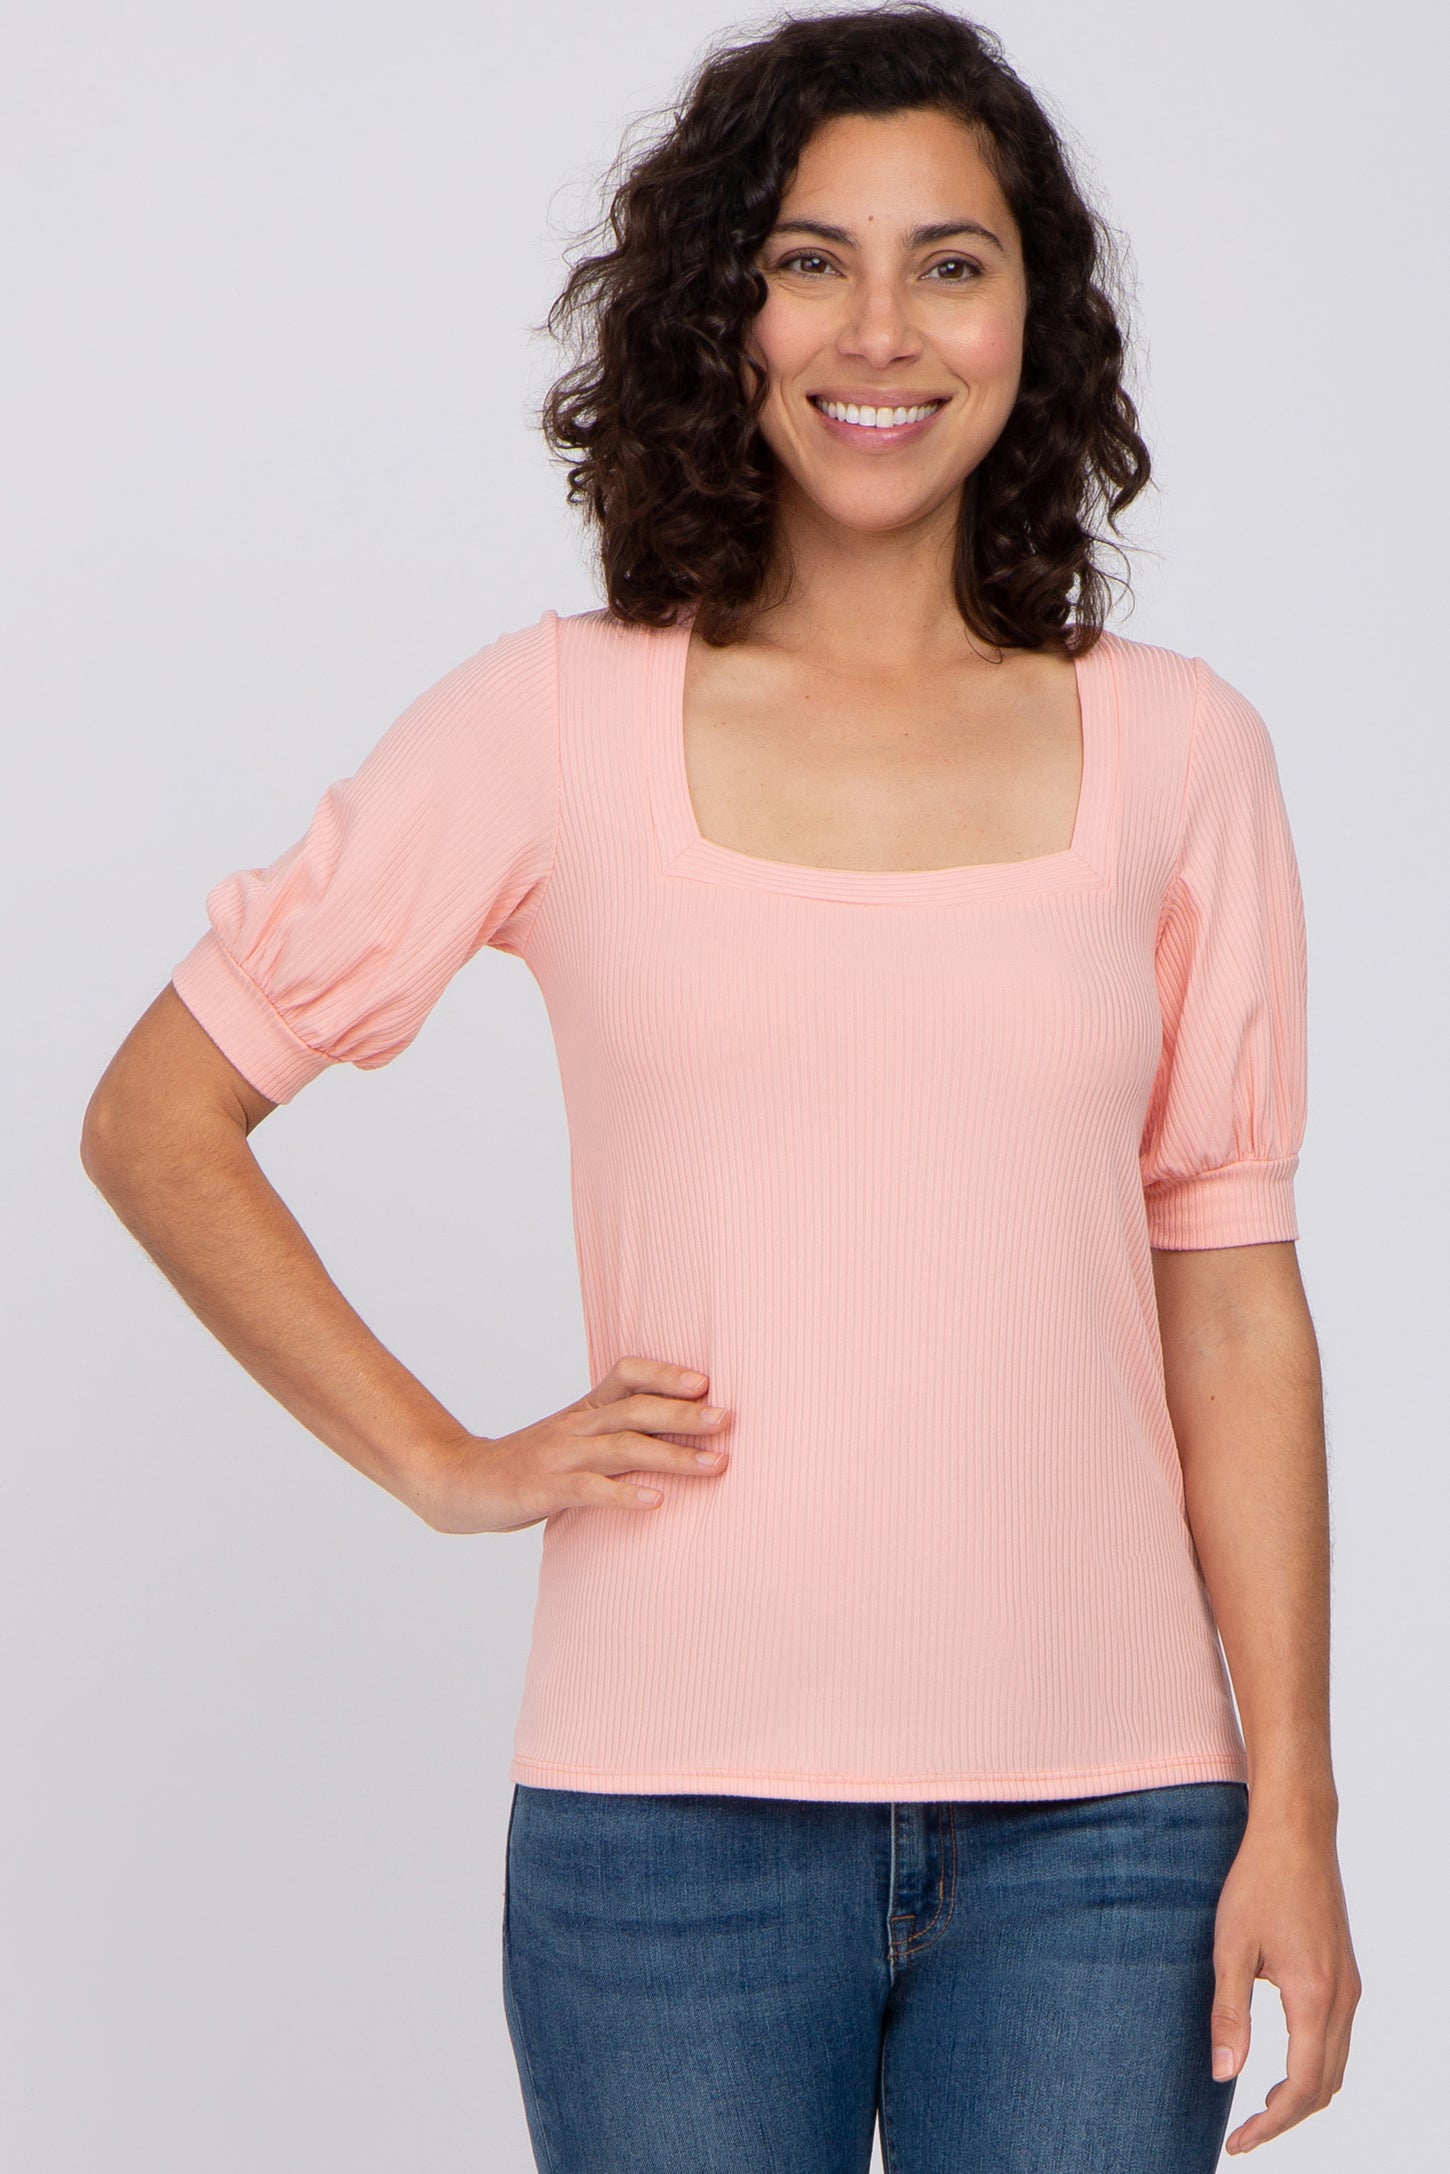 Pink Square Neck Ribbed Maternity Top